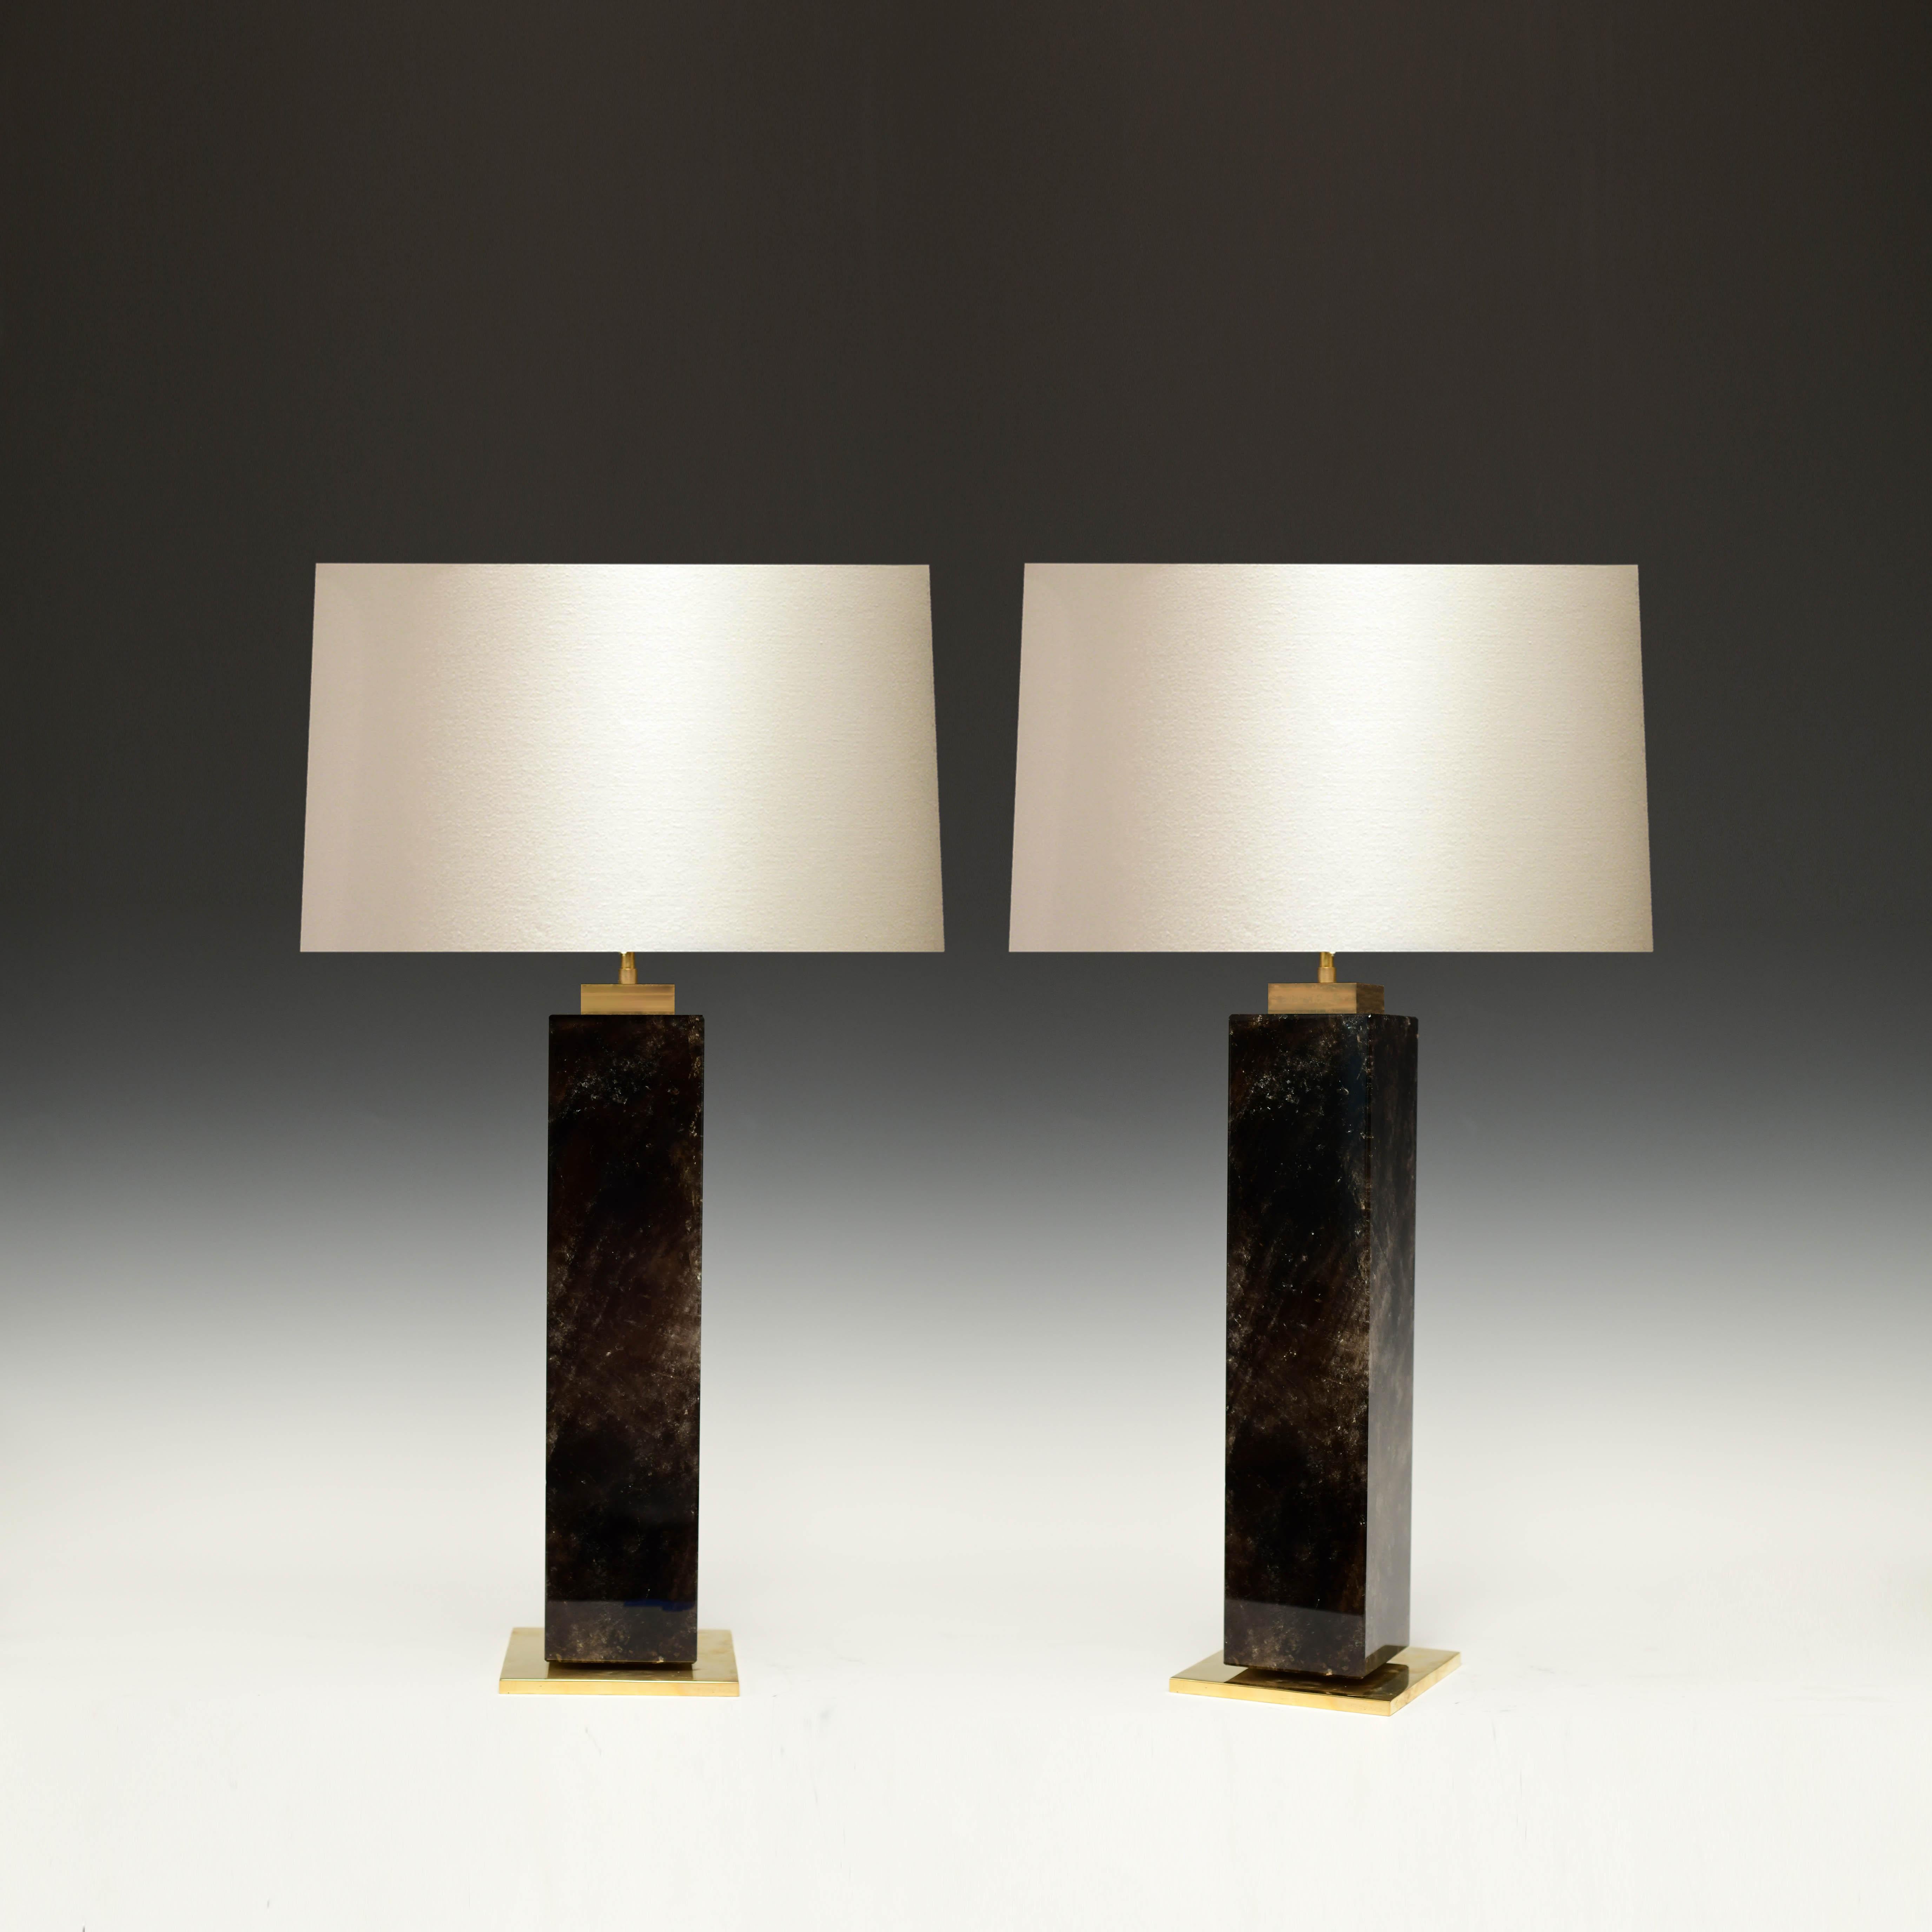 Column form dark rock crystal lamps with the polish brass base. Created by Phoenix, NYC. 
To the top of the rock crystal: 18